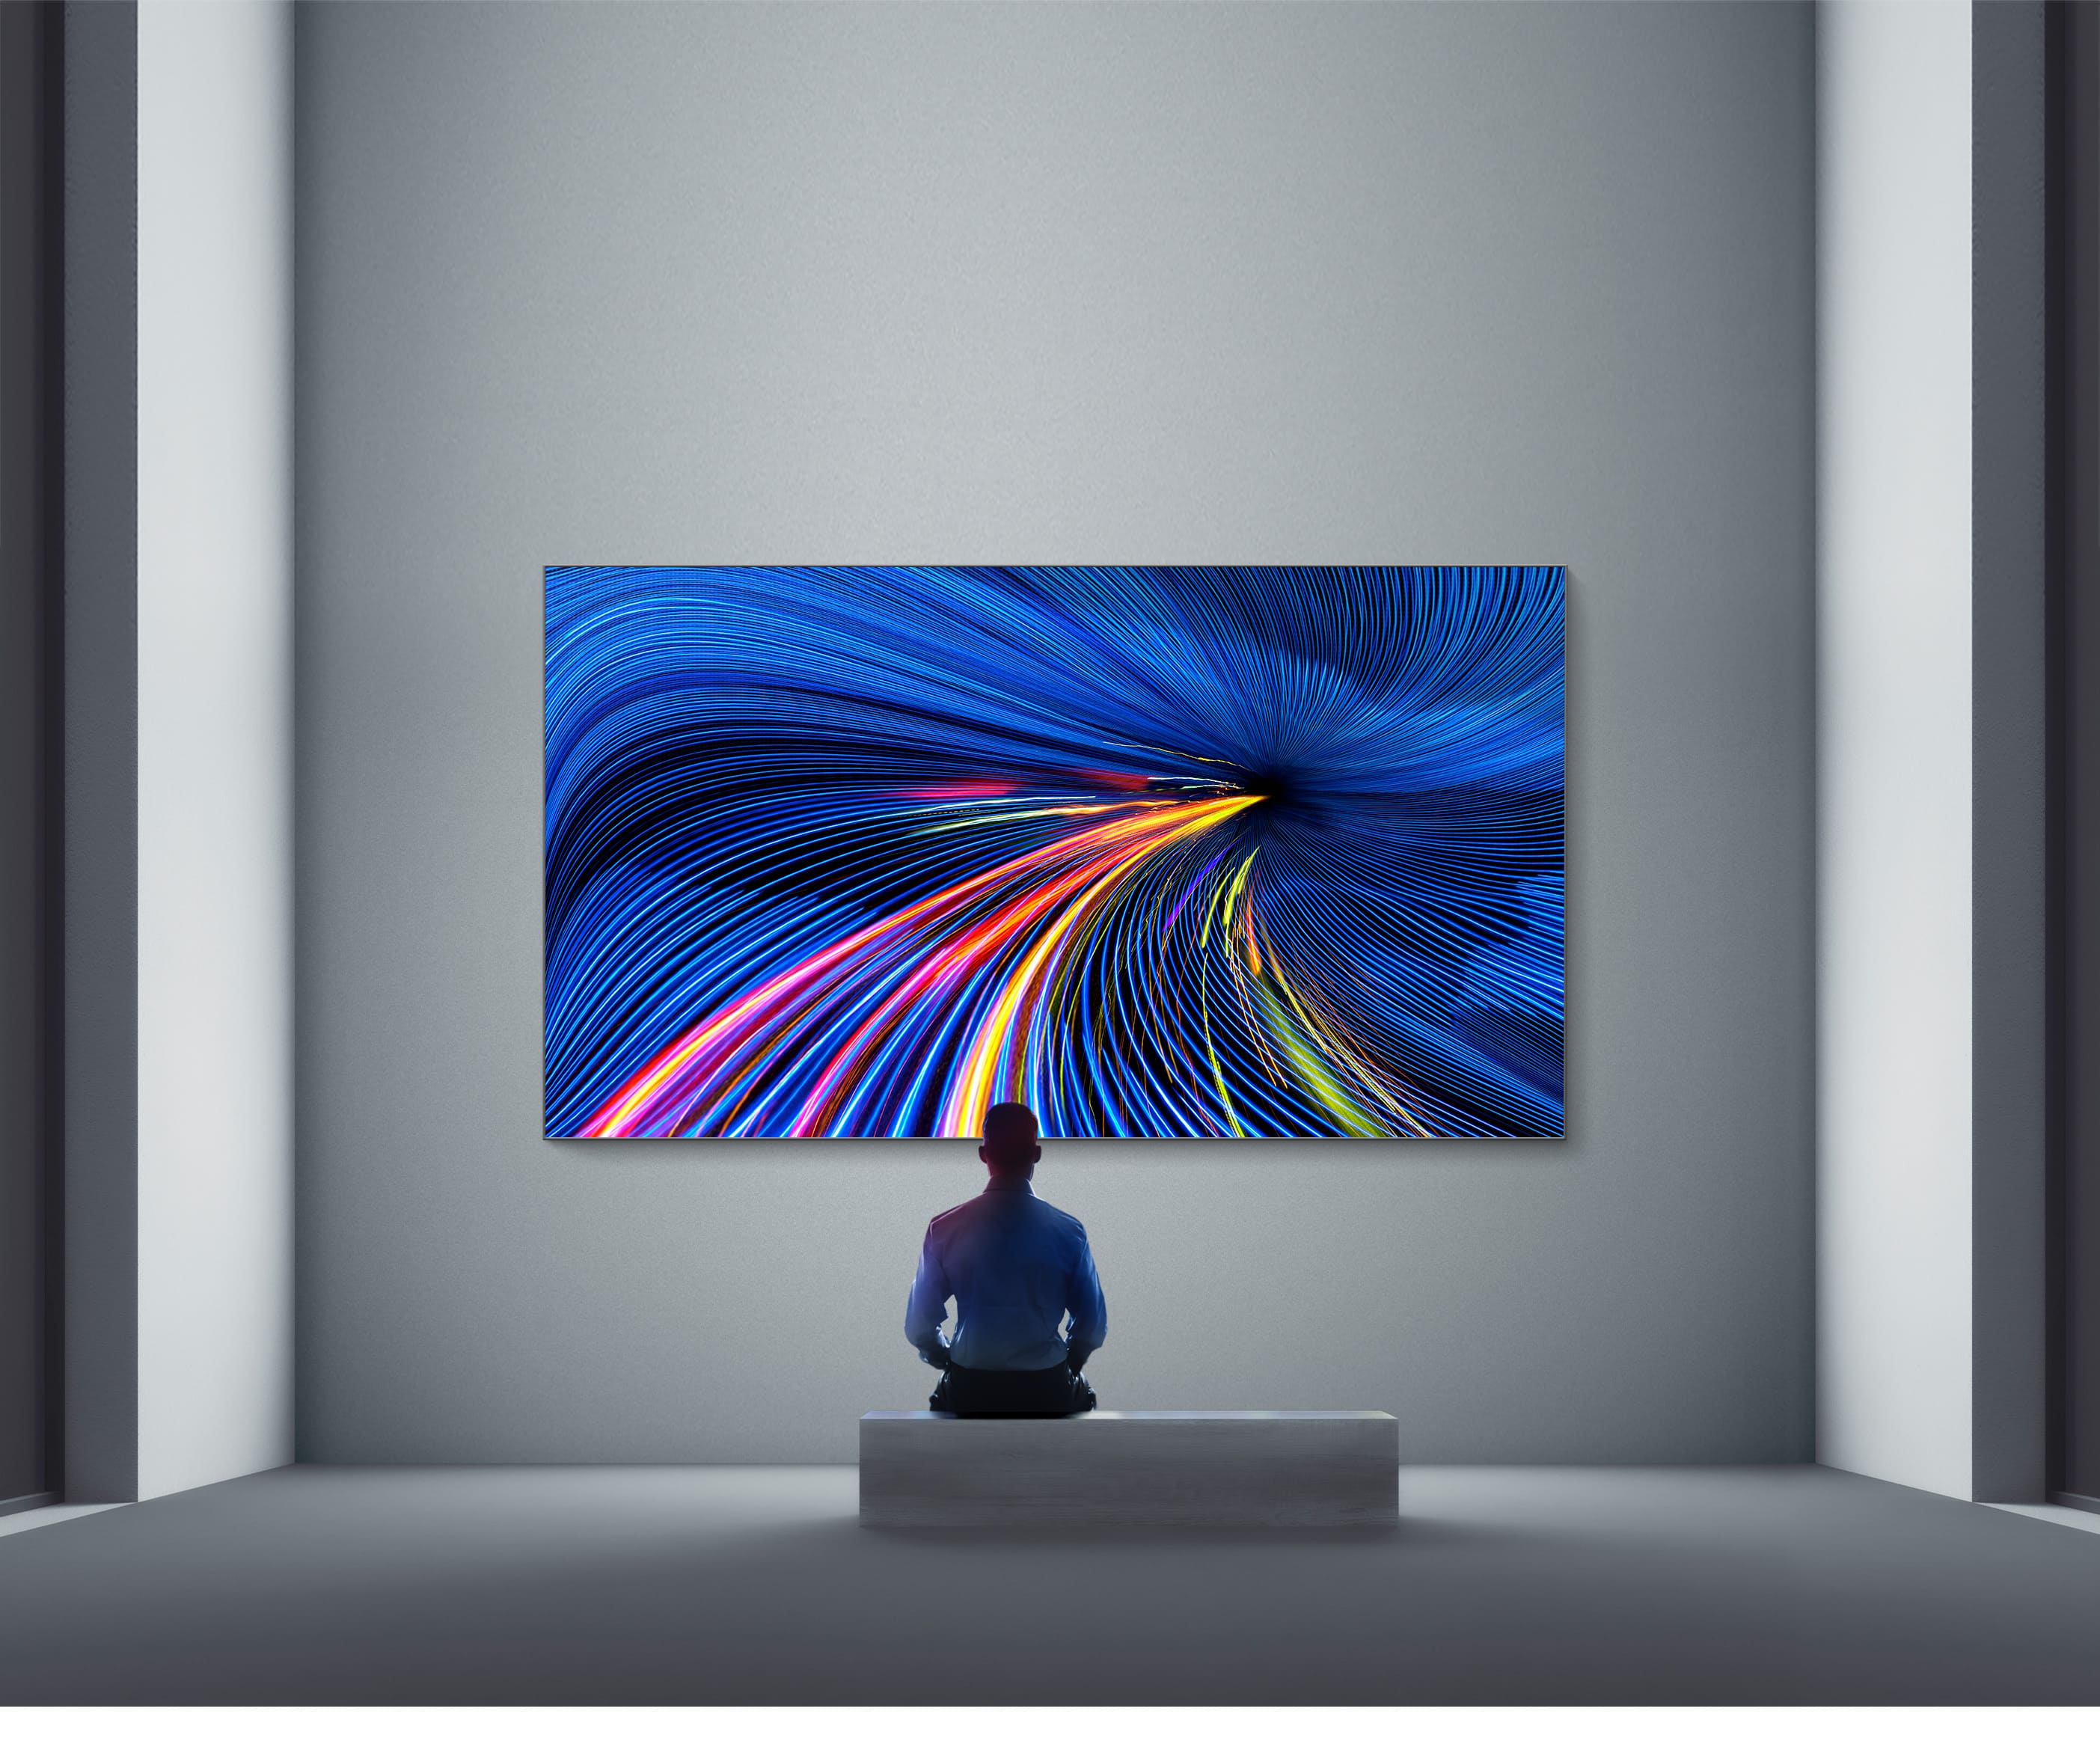 Samsung The Wall All-in-One IA016B - 146 inch LED wall - 1.68 mm PP - 500 cd/m² - Full-HD - 1920 x 1080 - LED display